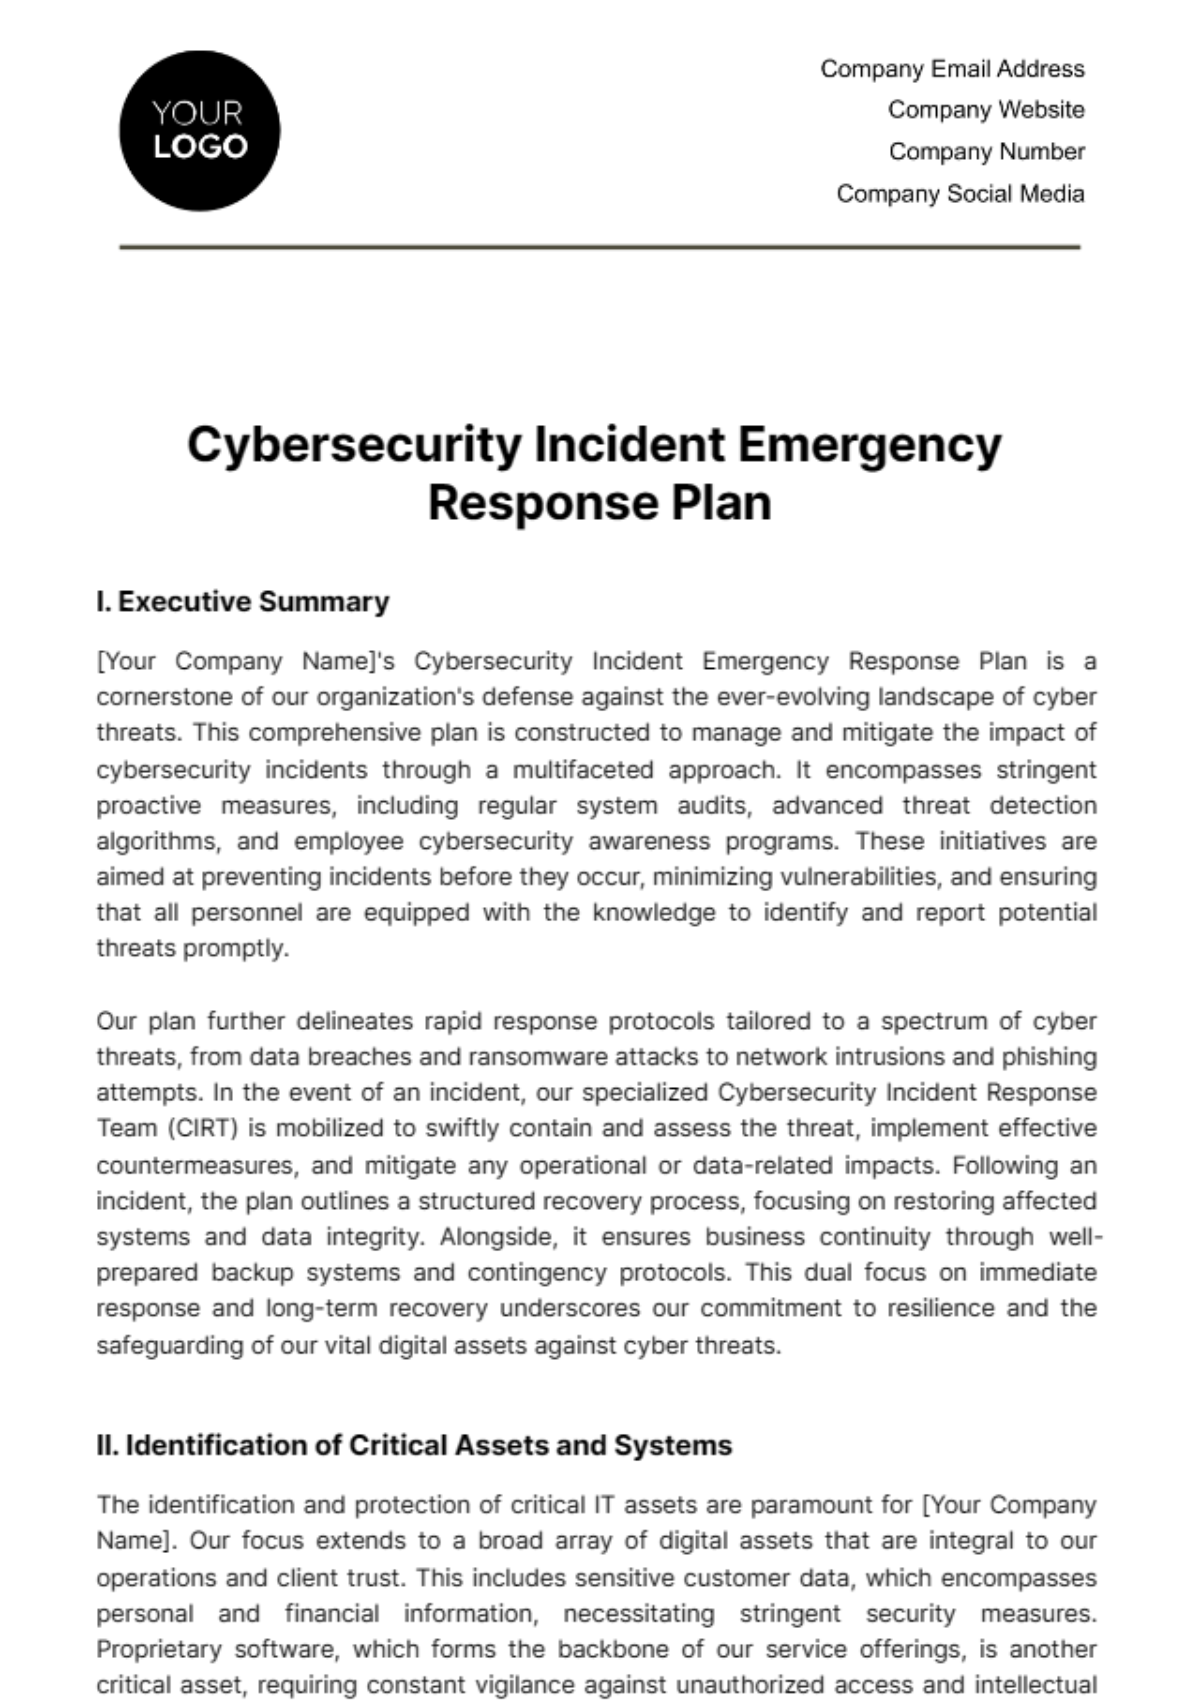 Cybersecurity Incident Emergency Response Plan Template